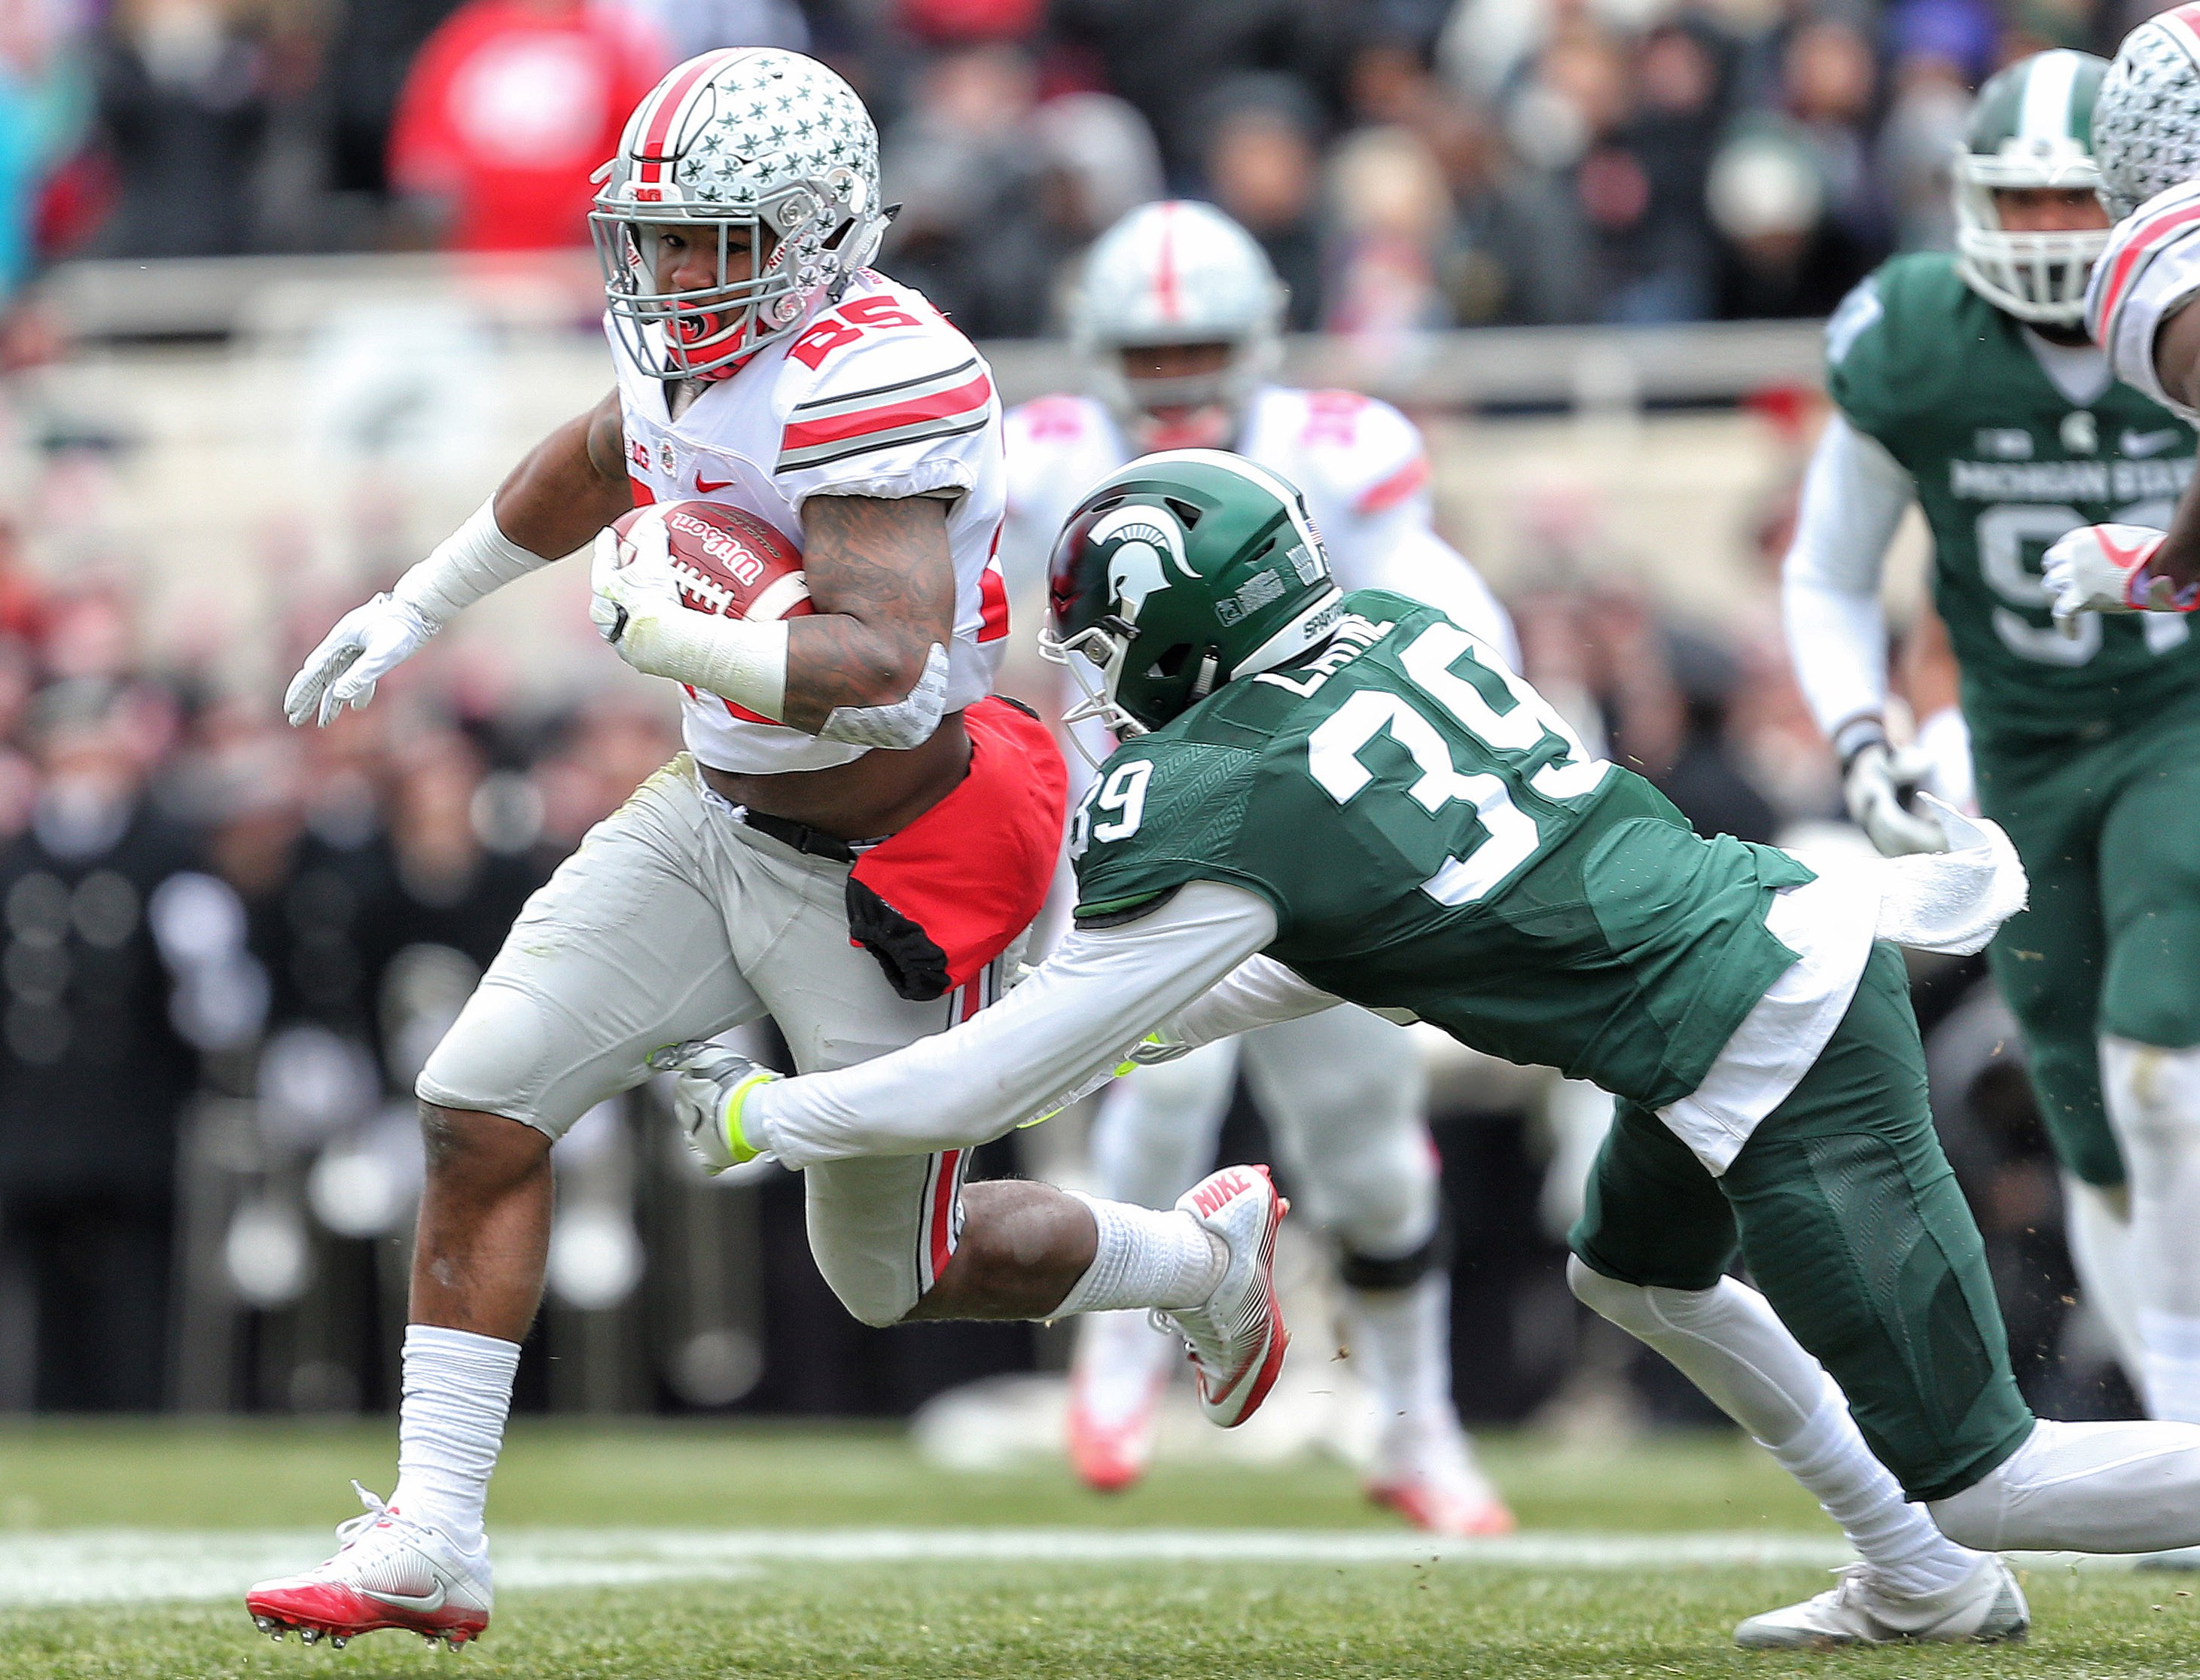 Michigan State Football: Just how good can Justin Layne be?